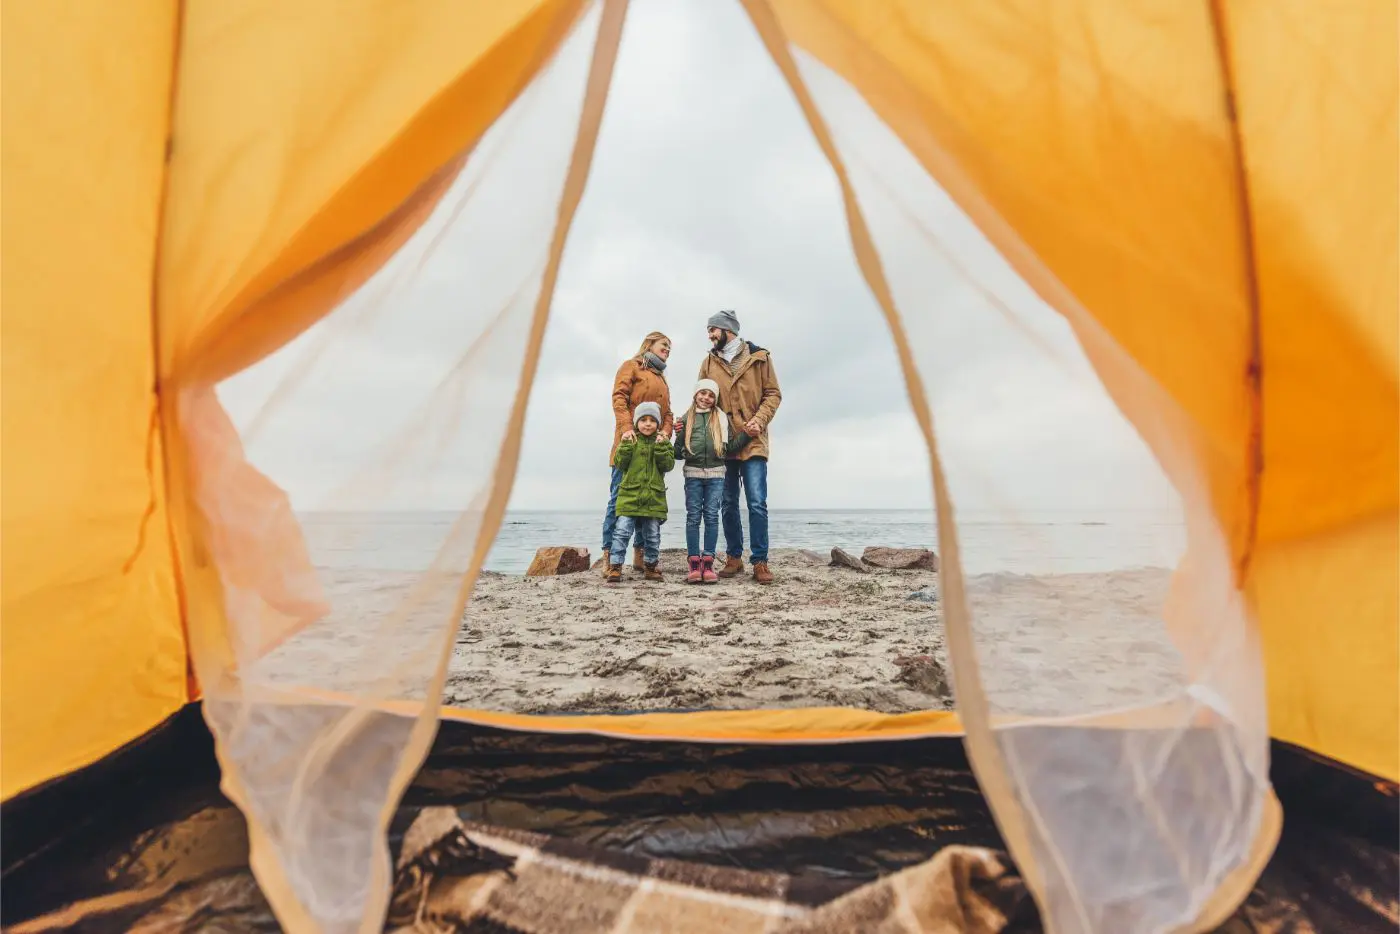 A family backpacking and camping on the beach